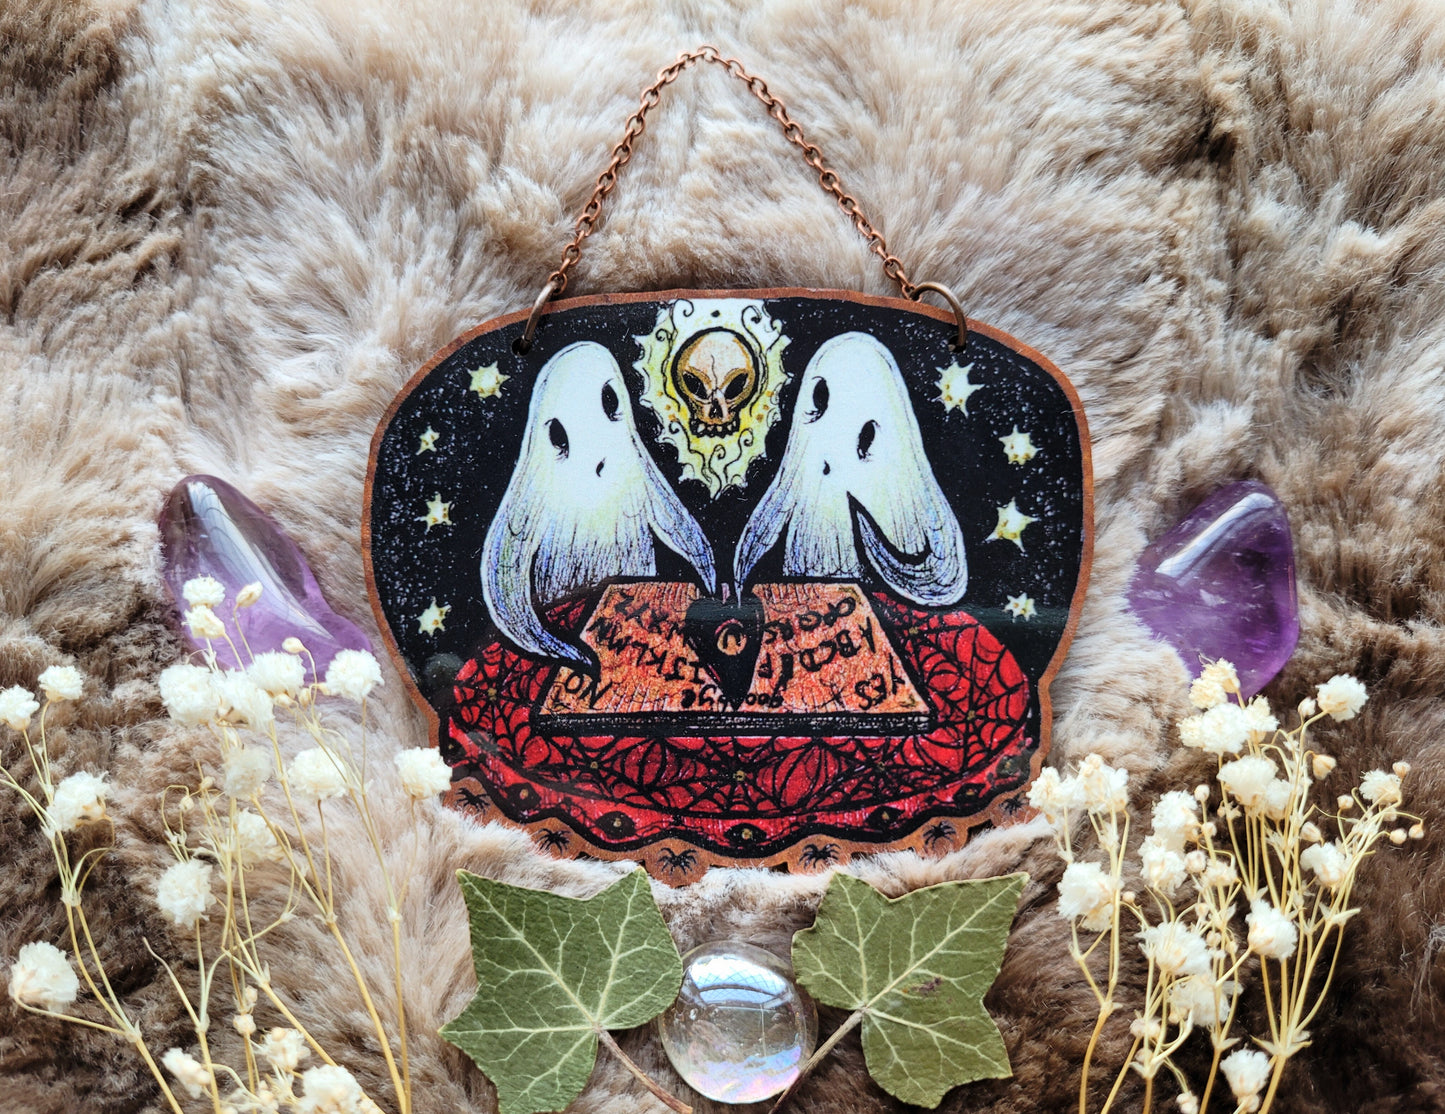 Ghost Seance illustrated ornament, wall hanging, responsibly sourced cherry wood, by Grace Moth